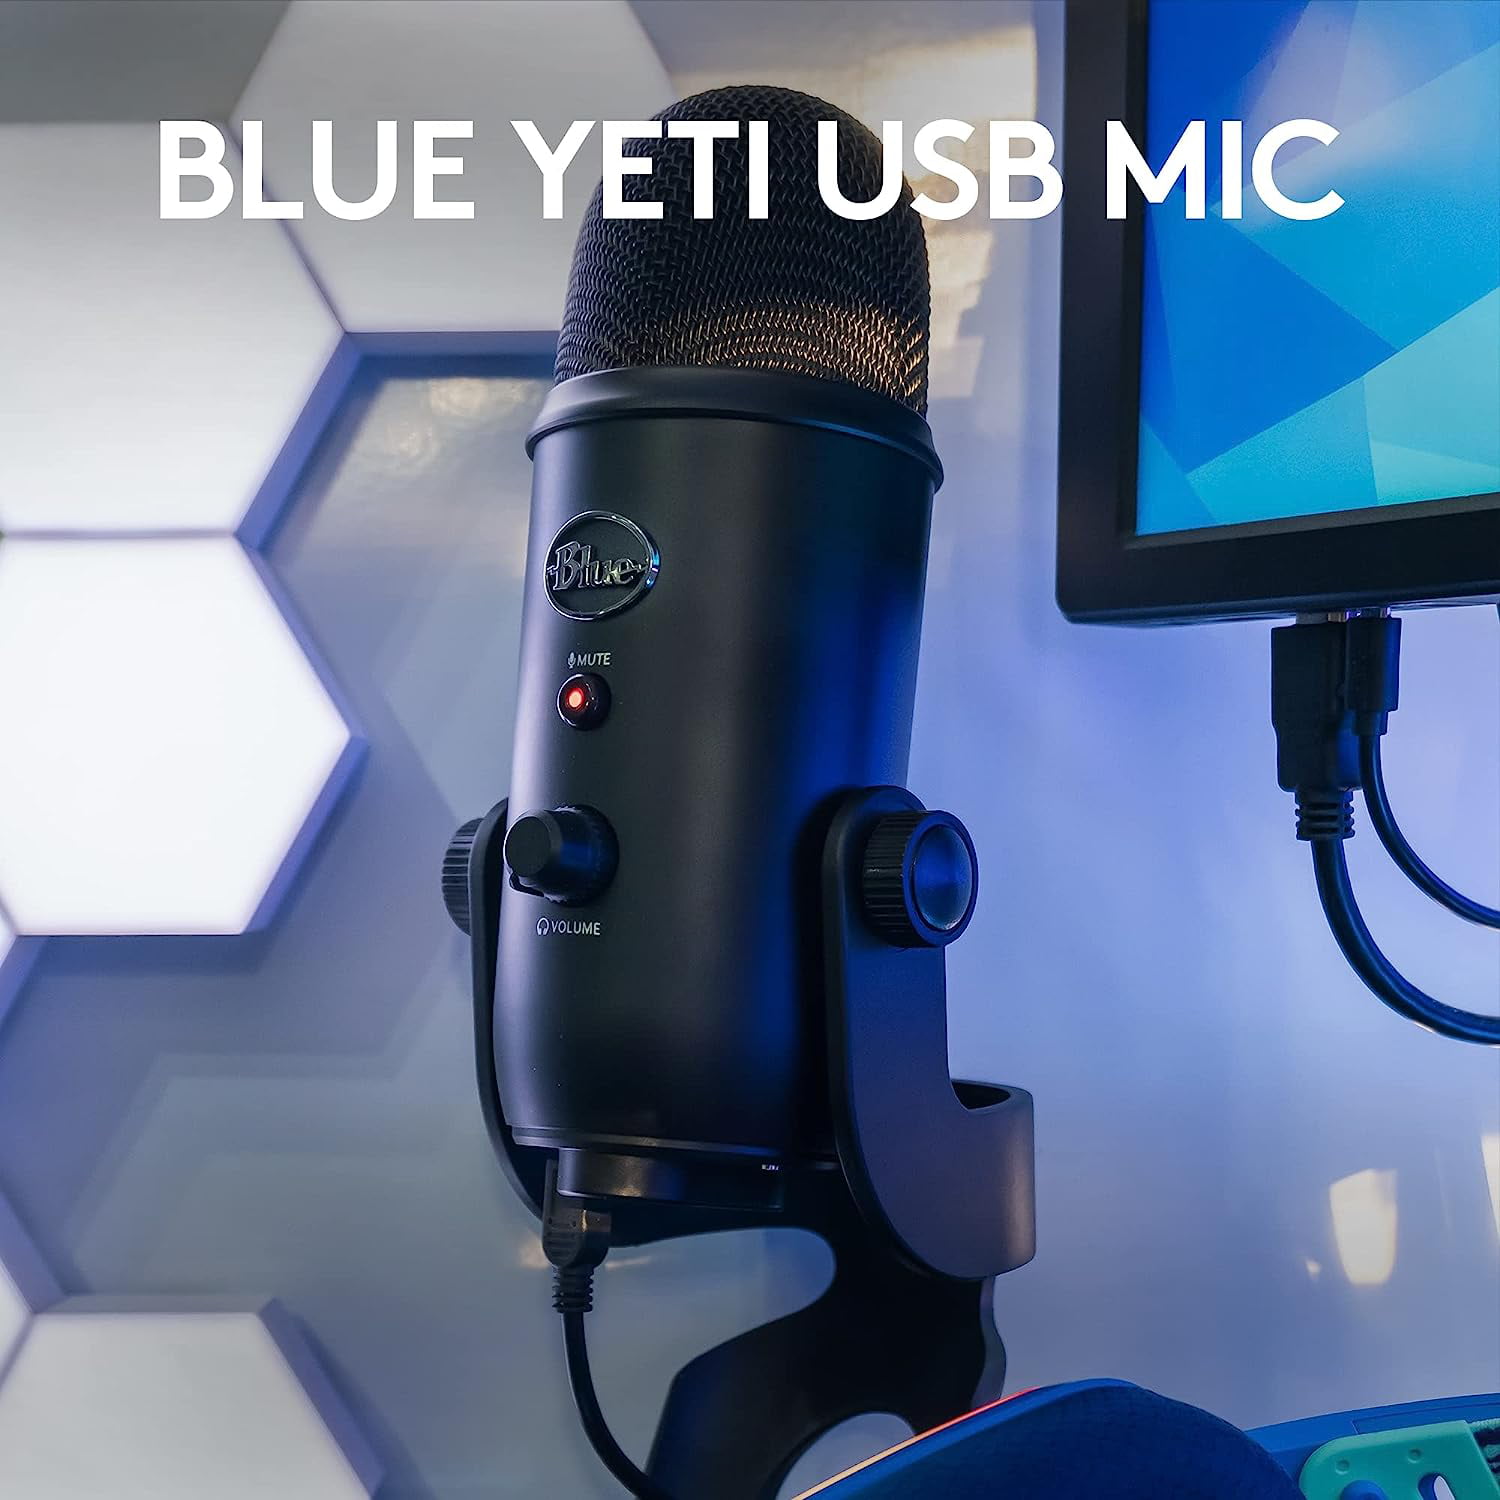 Blue Yeti Gaming/Streaming/Podcasting Michrophone 988-00100 from Logitech